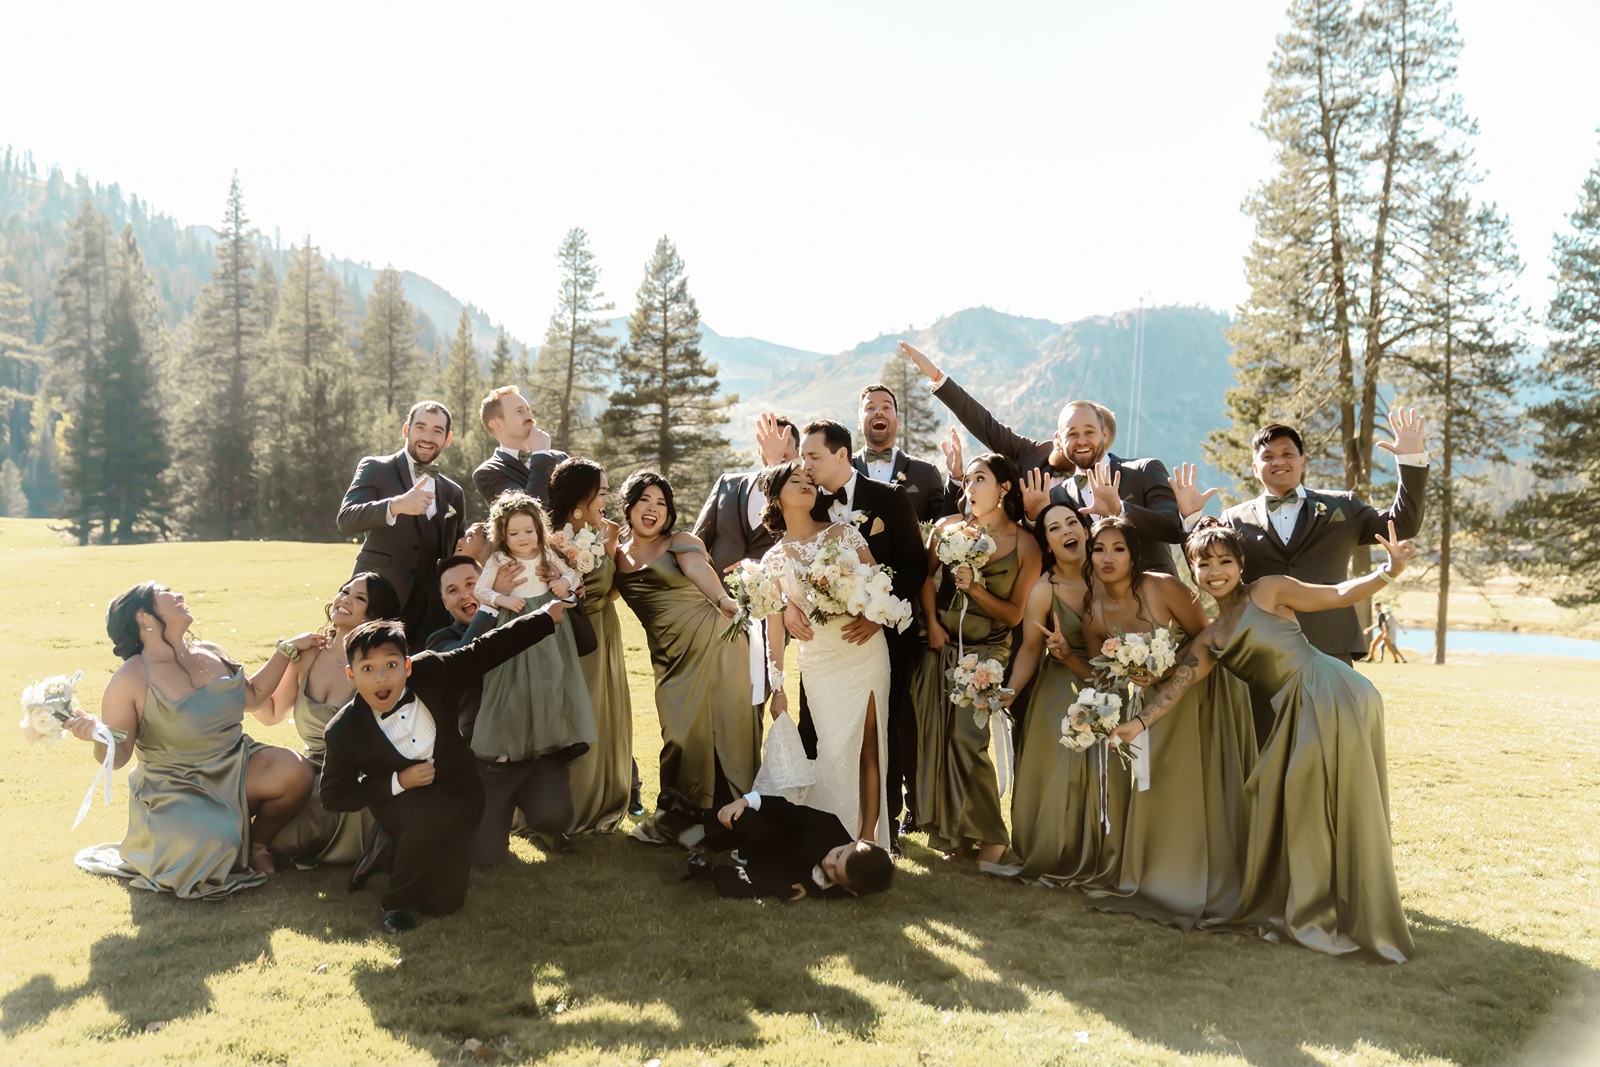 Bride and groom strike a funny pose with their bridesmaids and groomsmen at Everline Resort